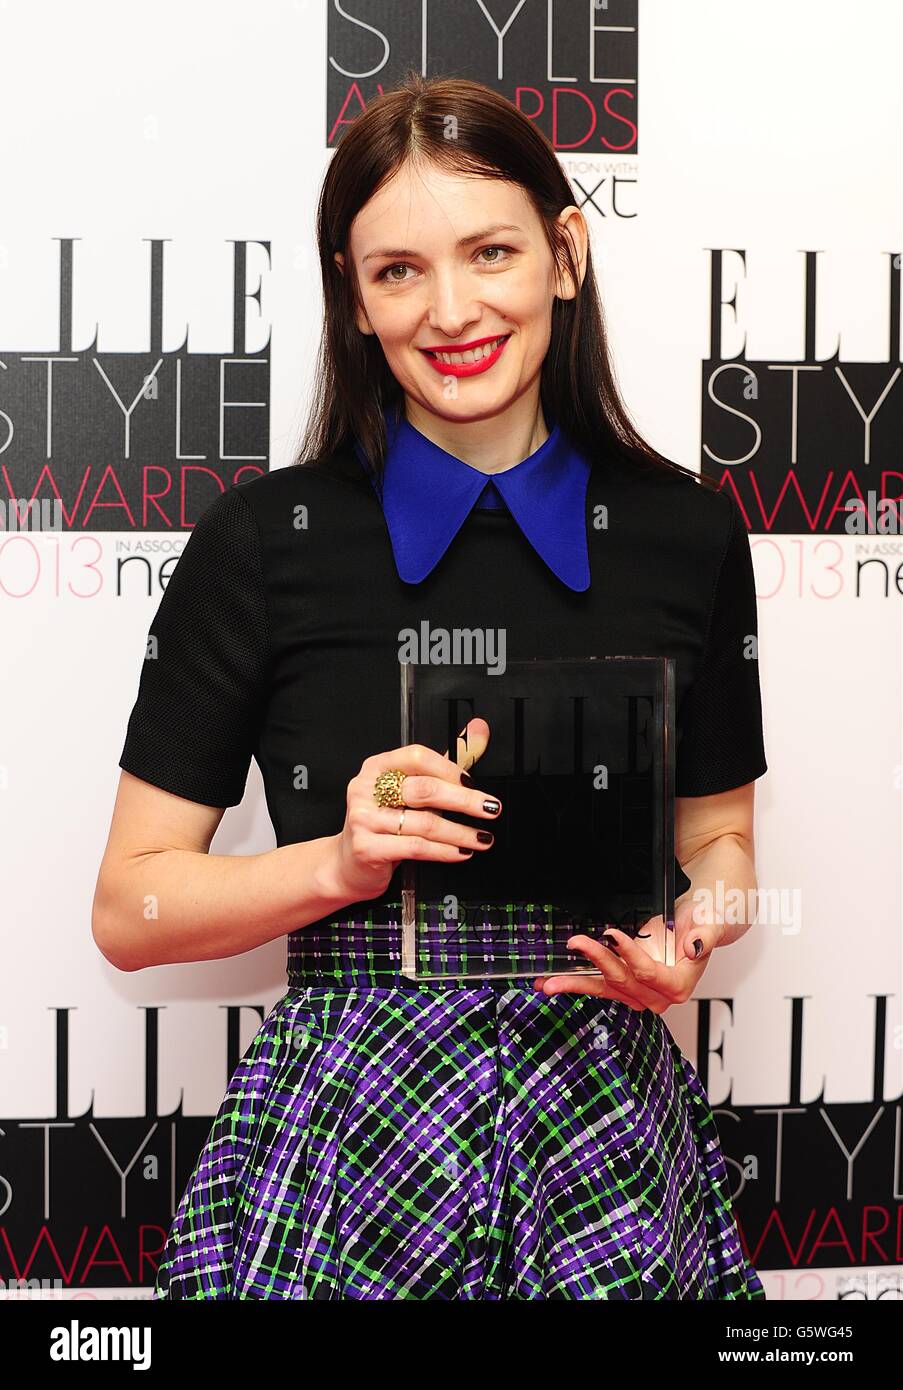 Red Carpet Fashion Award Winner Roksanda Ilincic at the 2013 Elle Style Awards at The Savoy Hotel in central London. Stock Photo